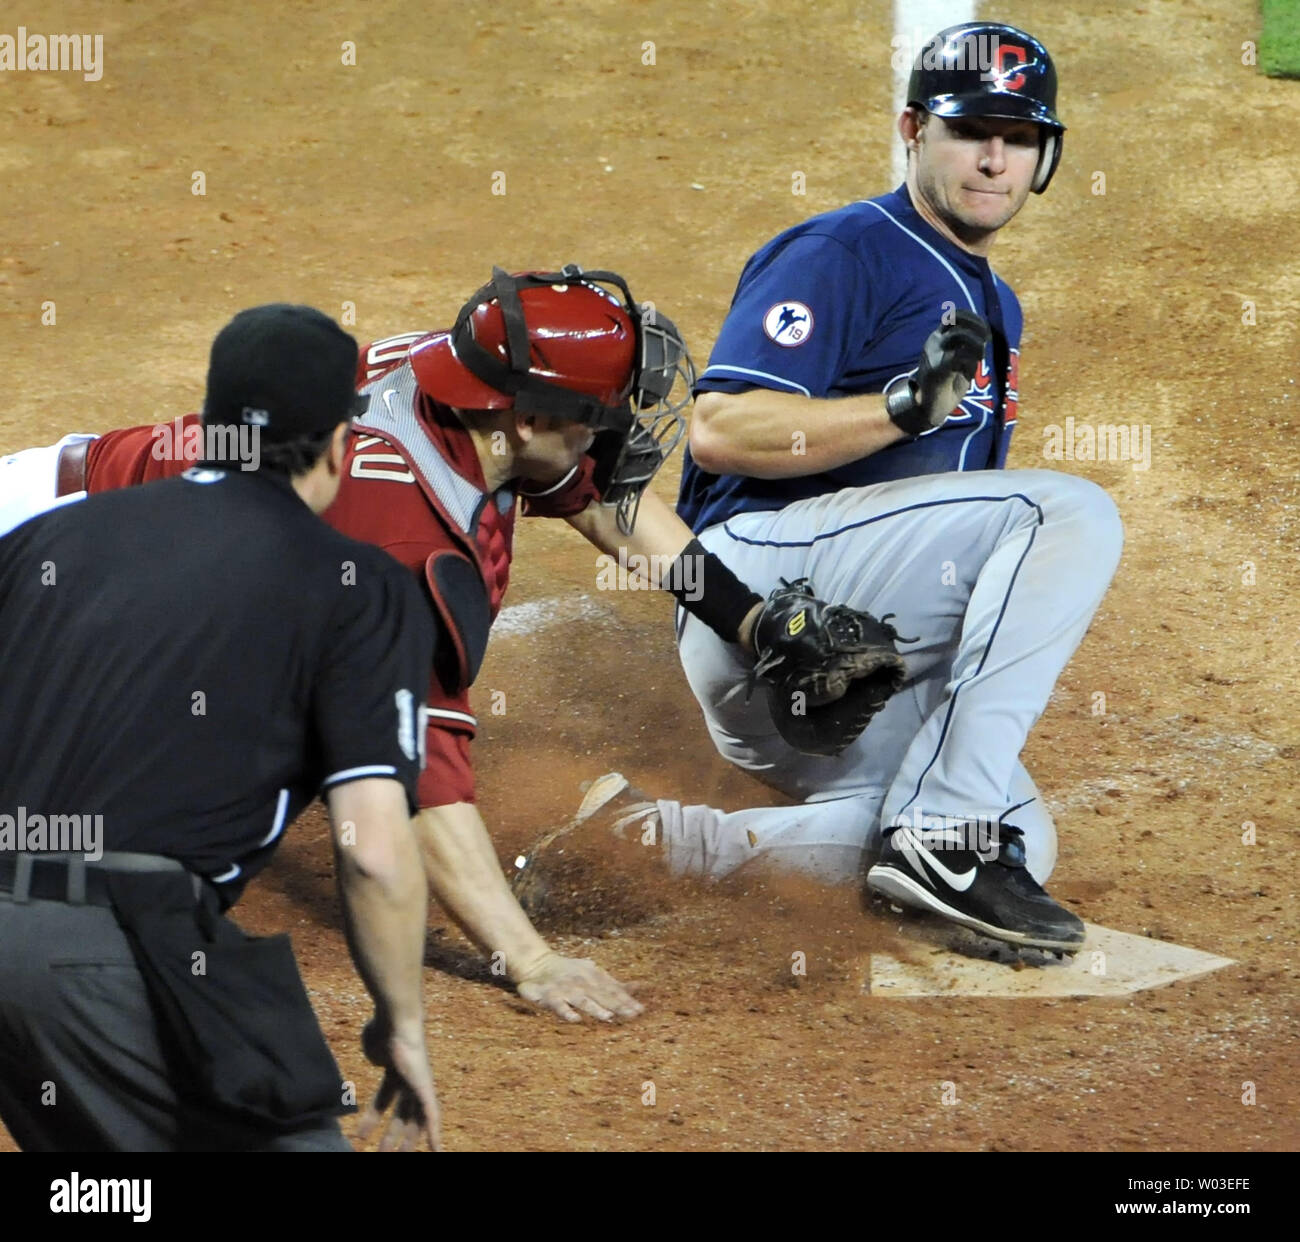 Cleveland Indians Lou Marson is safe at home as Arizona Diamondbacks catcher Miguel Montero makes a late tag in the ninth inning at Chase Field in Phoenix, AZ, June 29,2011.  The Indians defeated the Diamondbacks 6-2.  UPI/Art Foxall Stock Photo